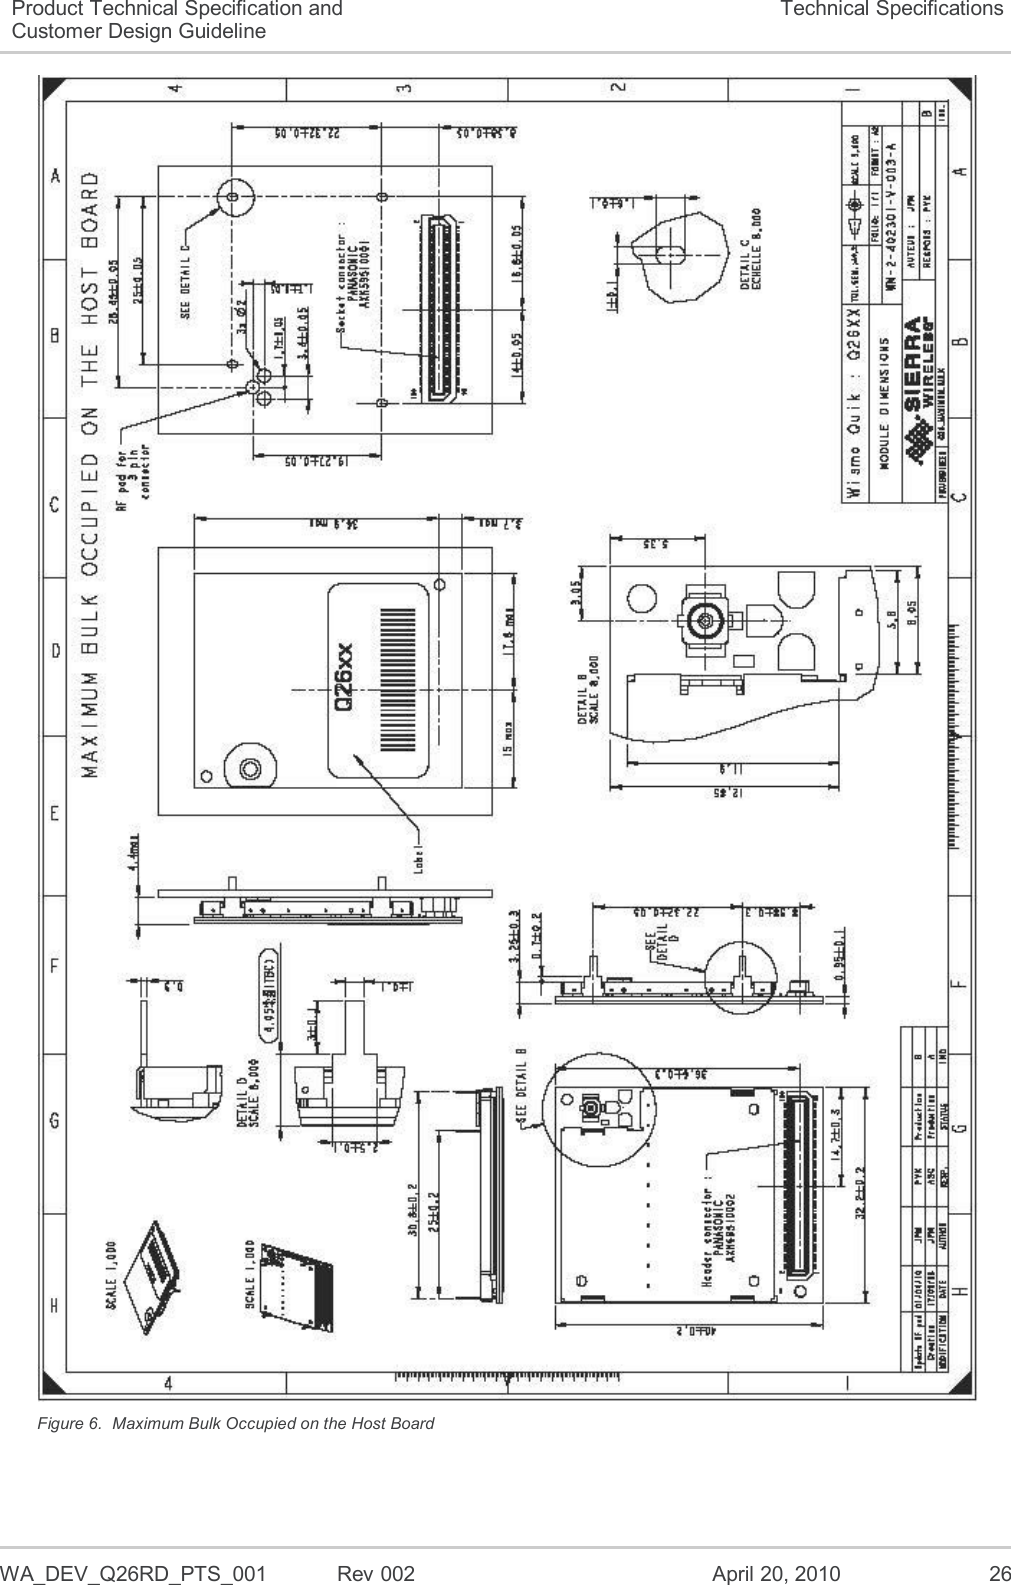  WA_DEV_Q26RD_PTS_001  Rev 002  April 20, 2010 26 Product Technical Specification and Customer Design Guideline Technical Specifications  Figure 6.  Maximum Bulk Occupied on the Host Board 